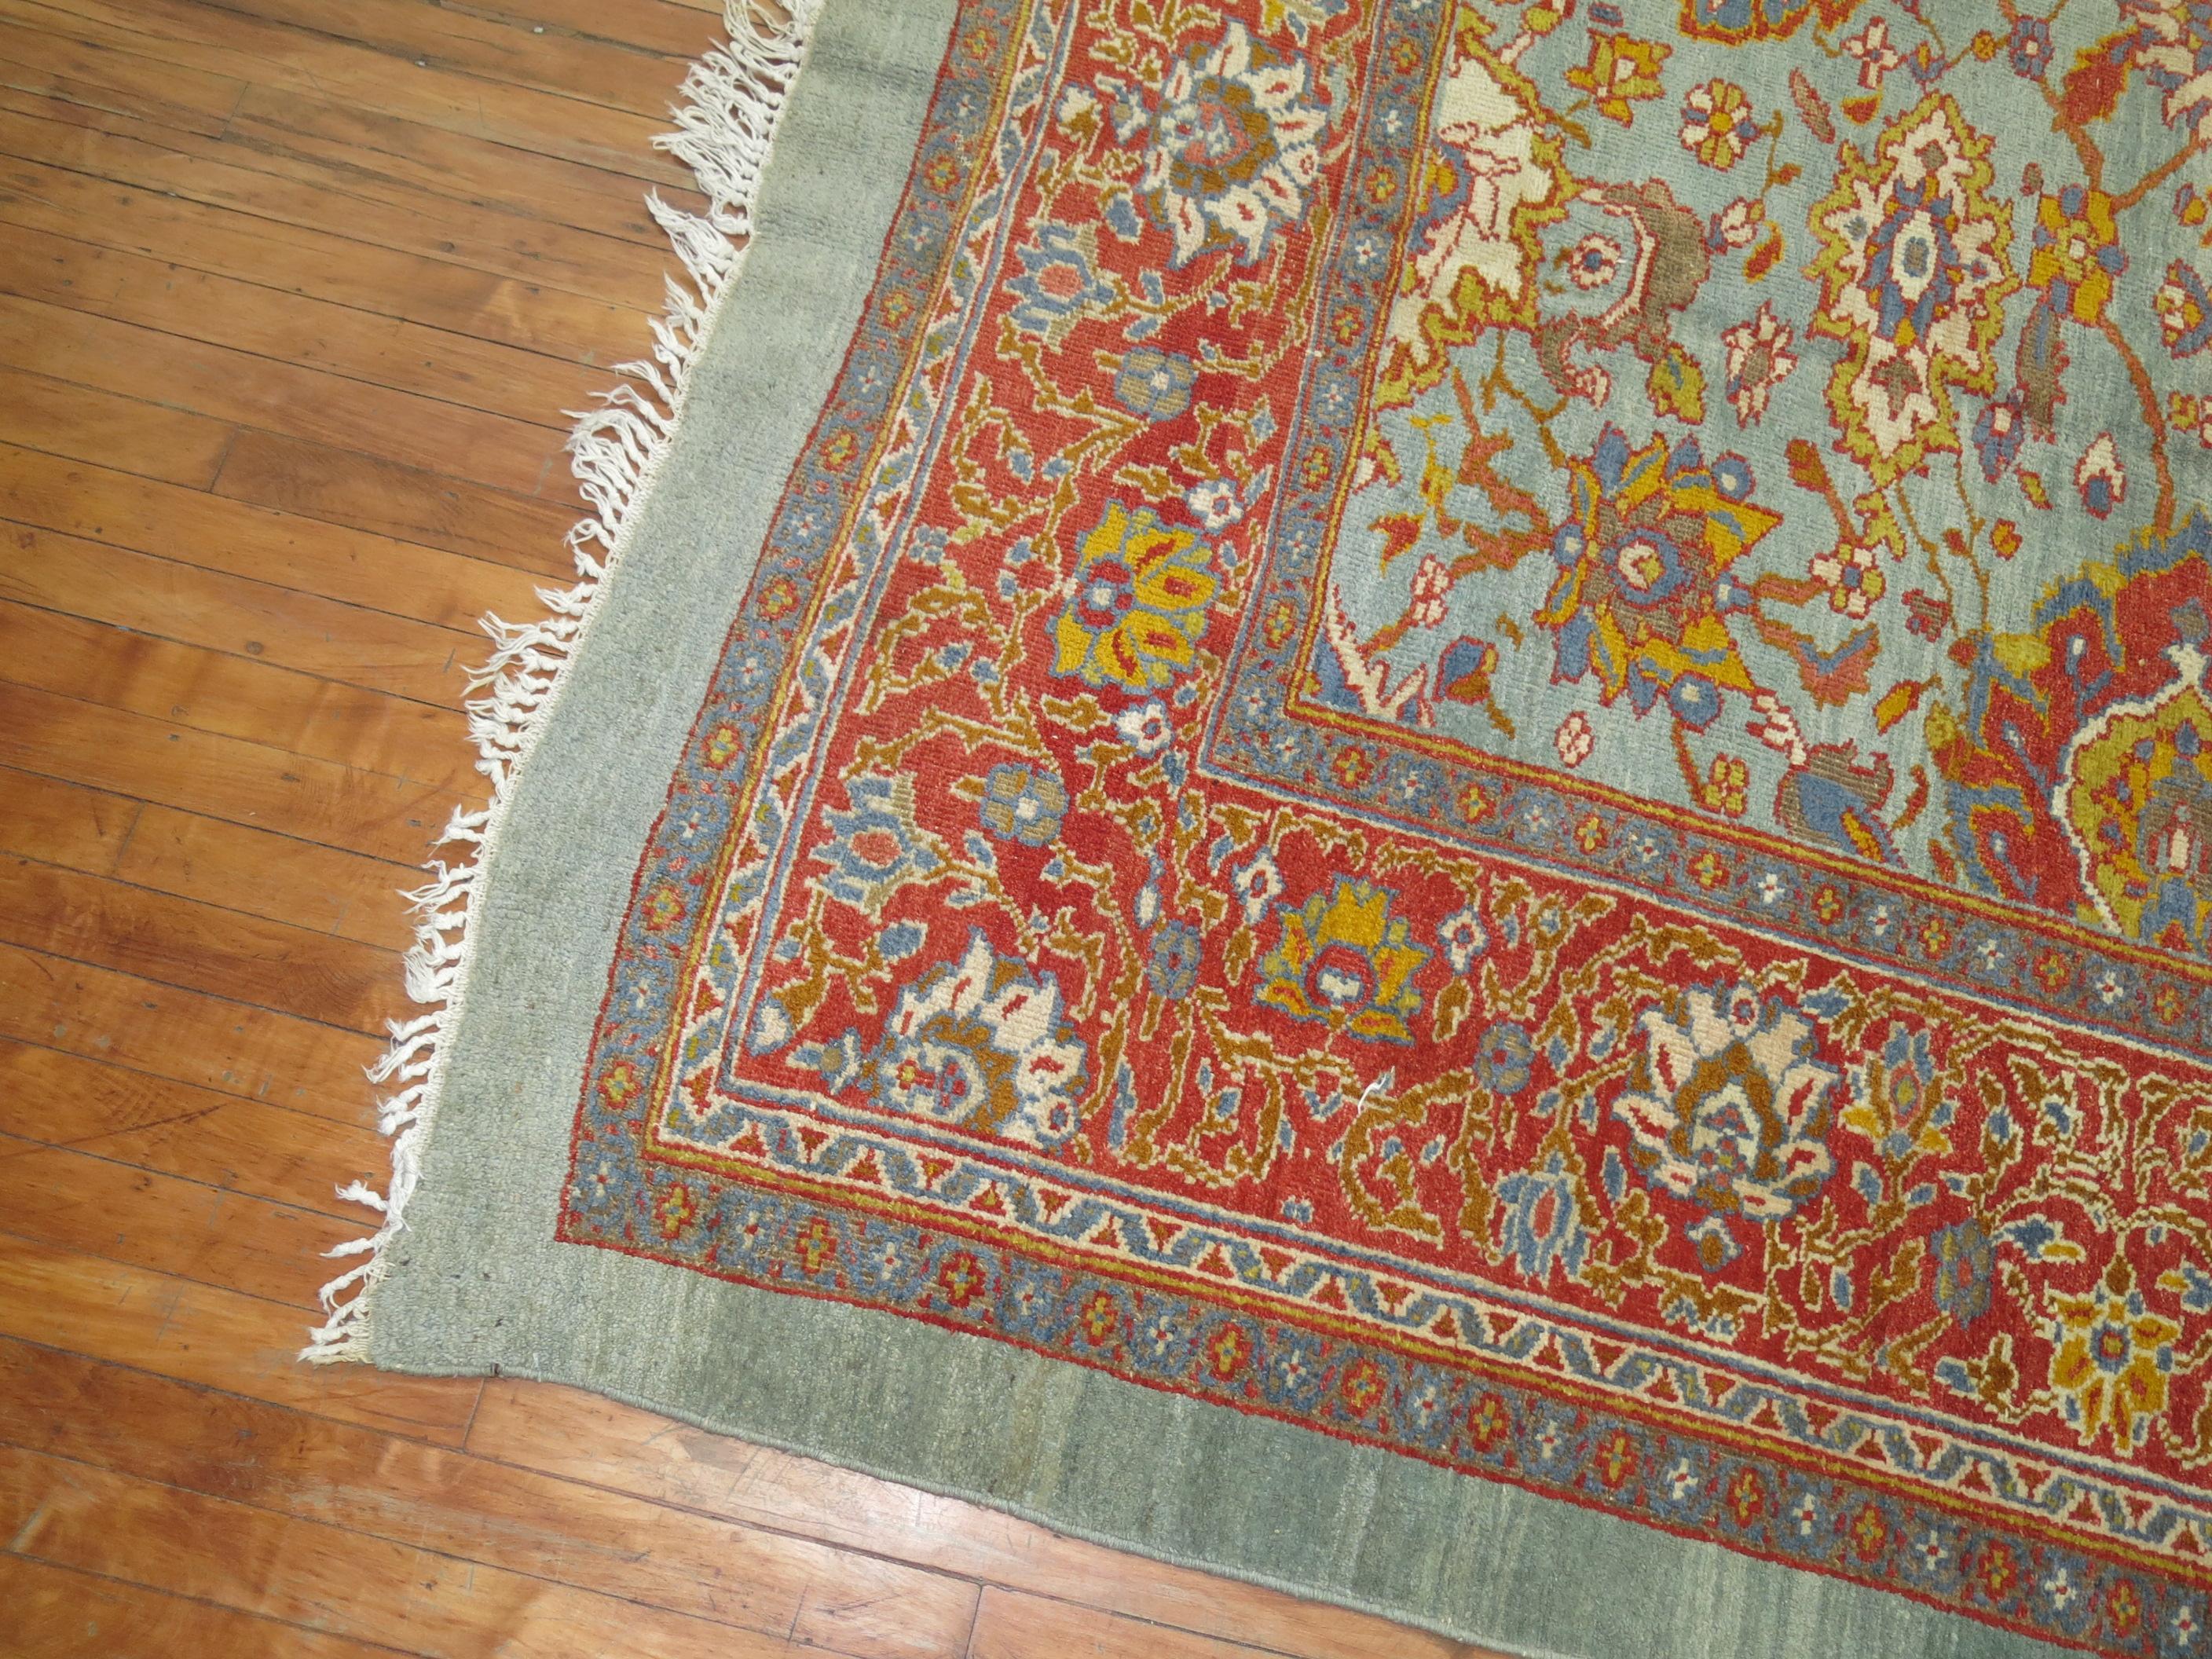 A connoisseur caliber early 20th century powder blue Persian Sultanabad carpet.

Woven in a series of villages in Western Central Iran, Sultanabad carpets employ over-scale, spacious all-over patterns that are highly prized for their versatility.